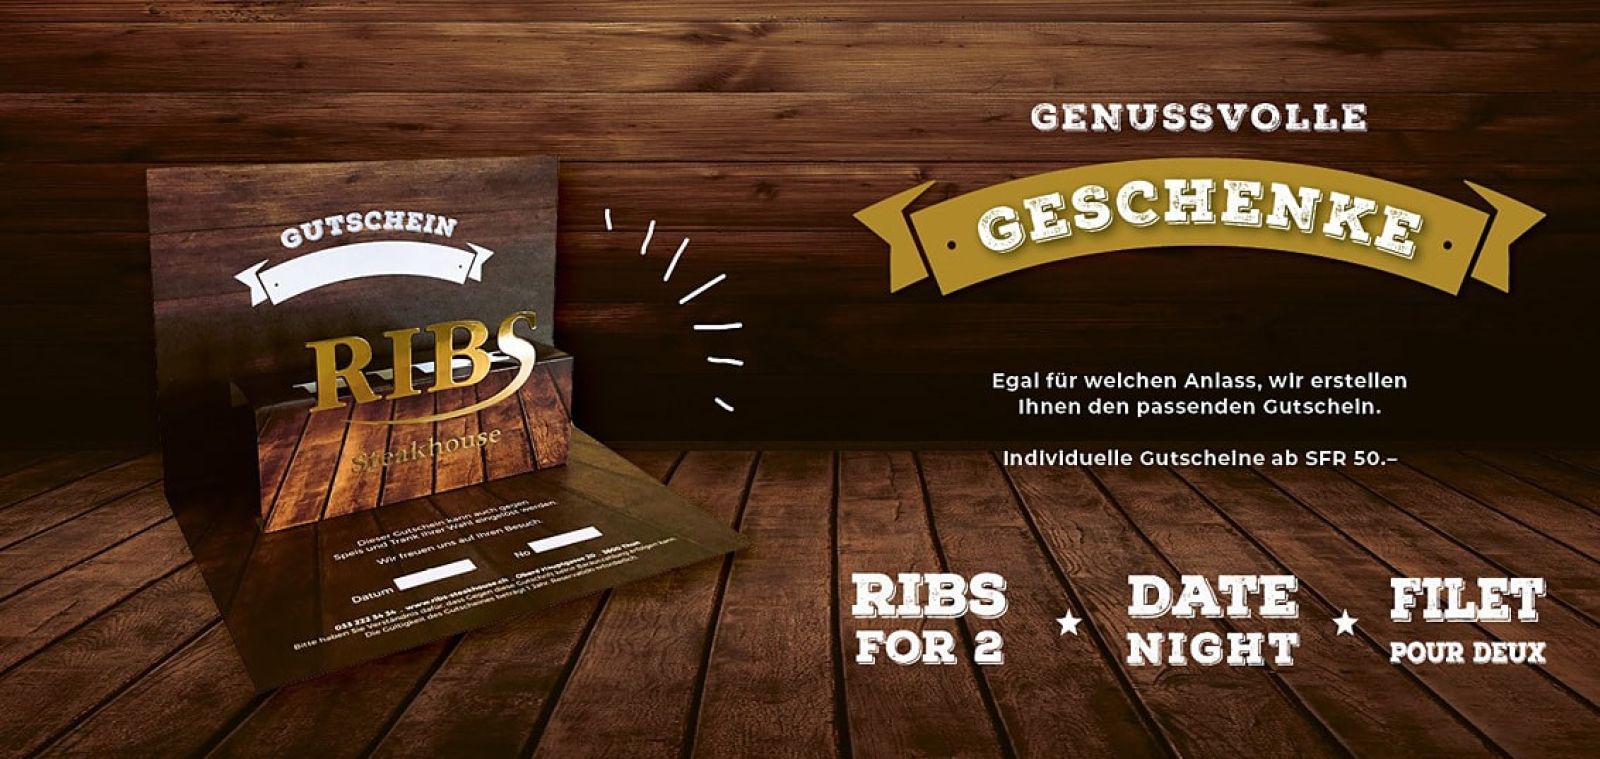 The gift idea - a voucher from RIBS Steakhouse Thun